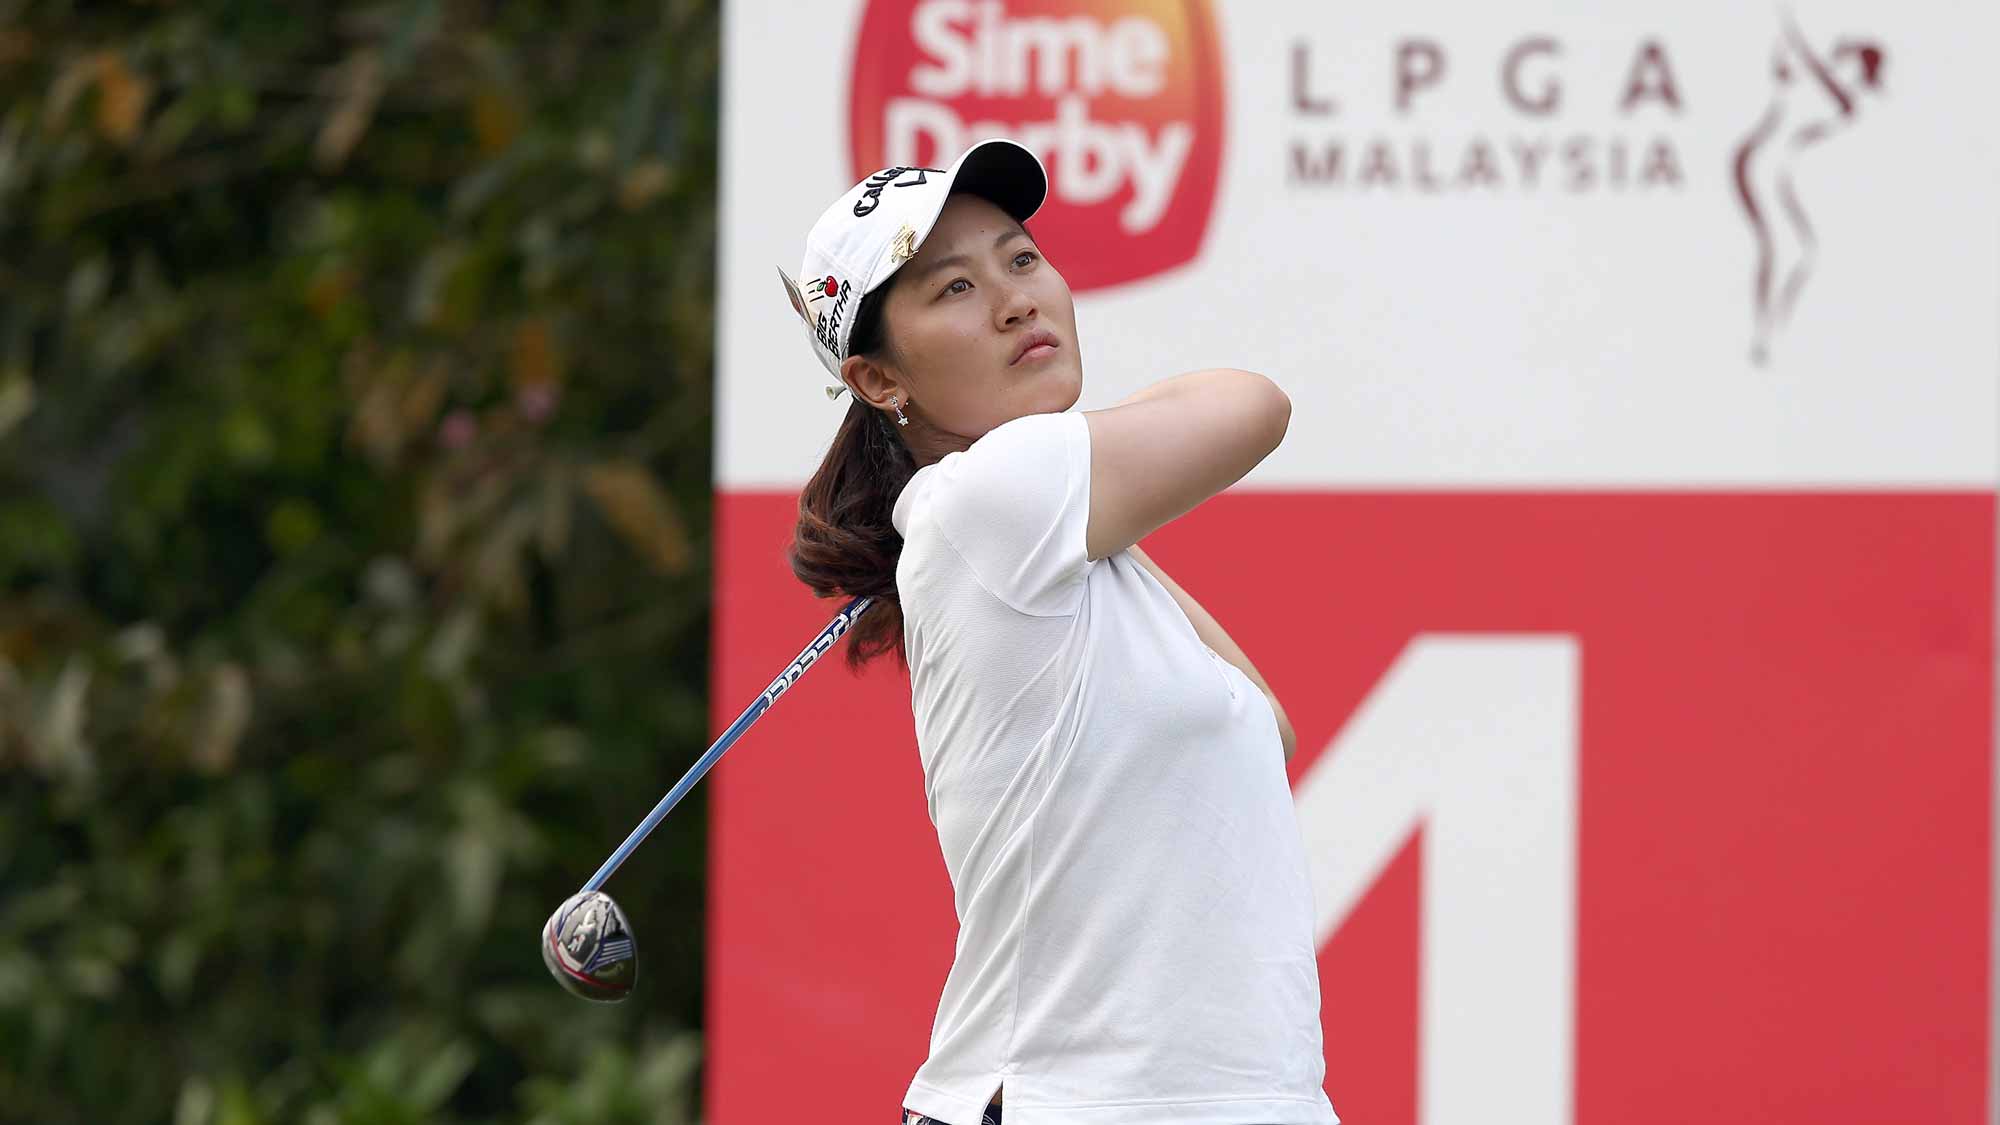 Xi Yu Lin of China watches her tee shot on the 4th hole during the final round of the Sime Darby LPGA Tour at Kuala Lumpur Golf & Country Club